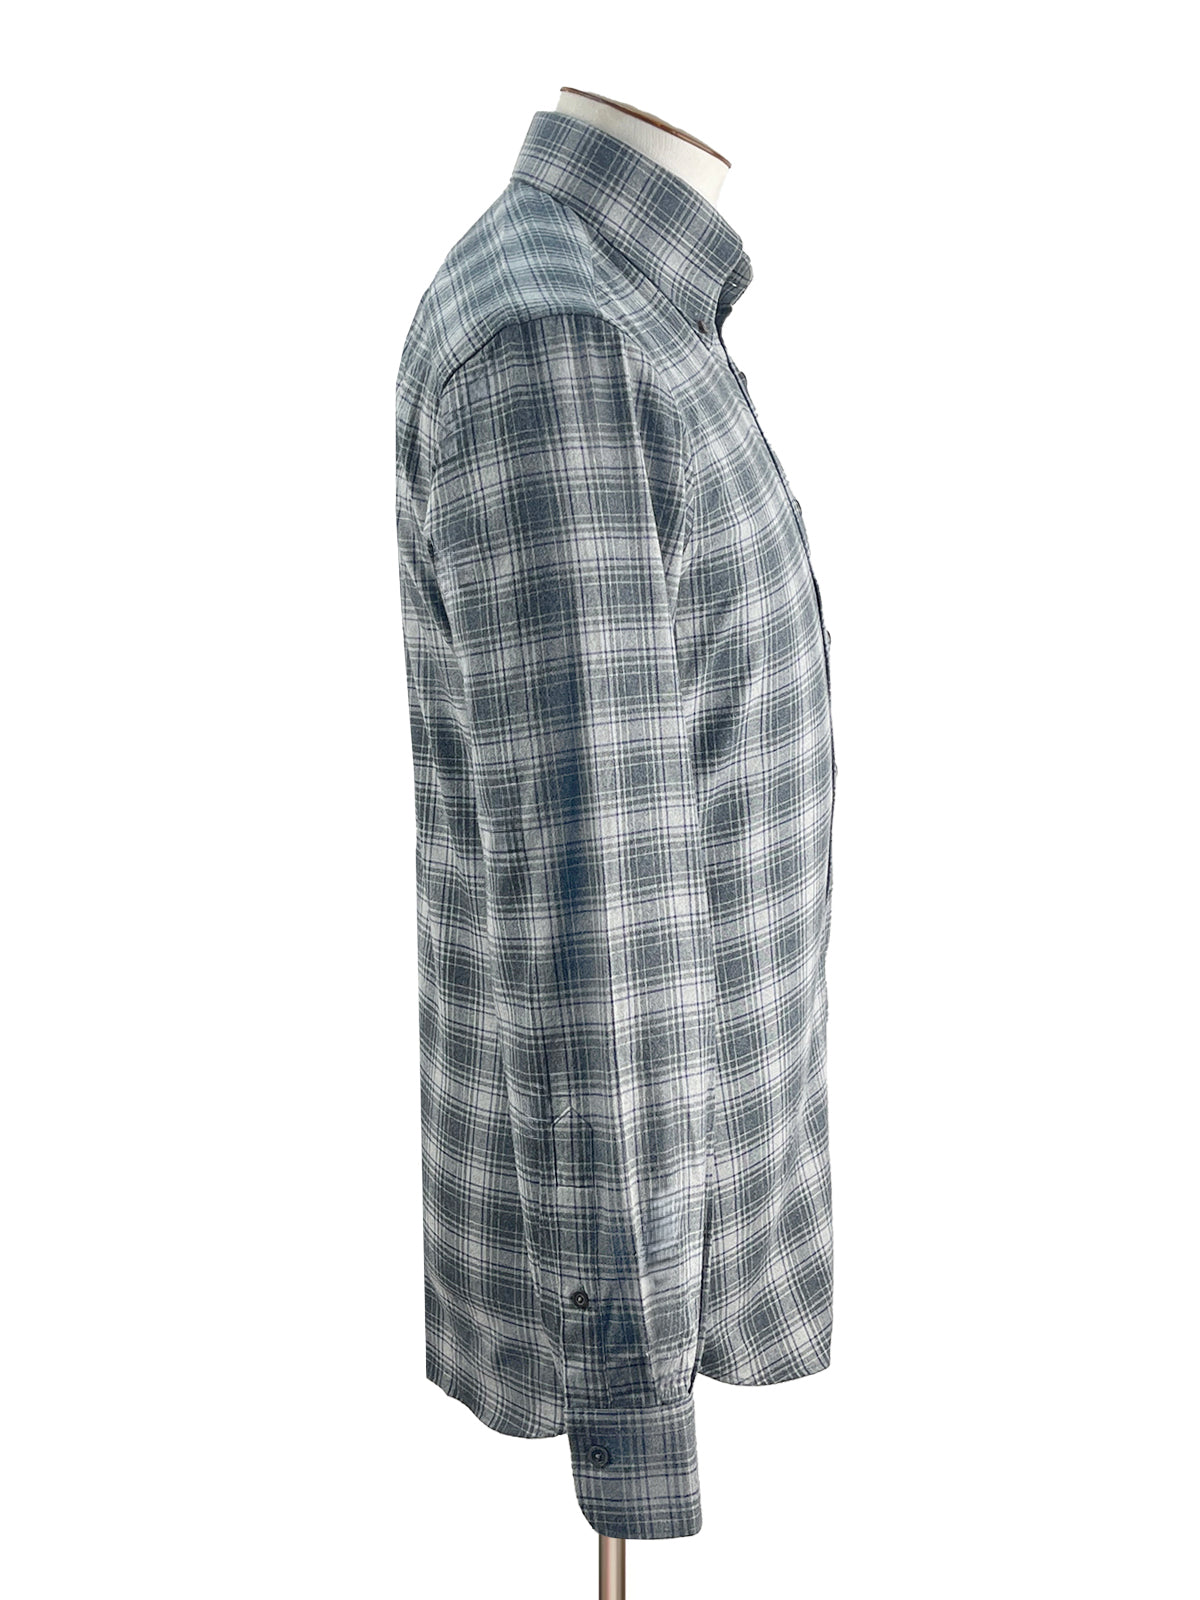 Mixed Grey Check Flannel Button Down Shirt